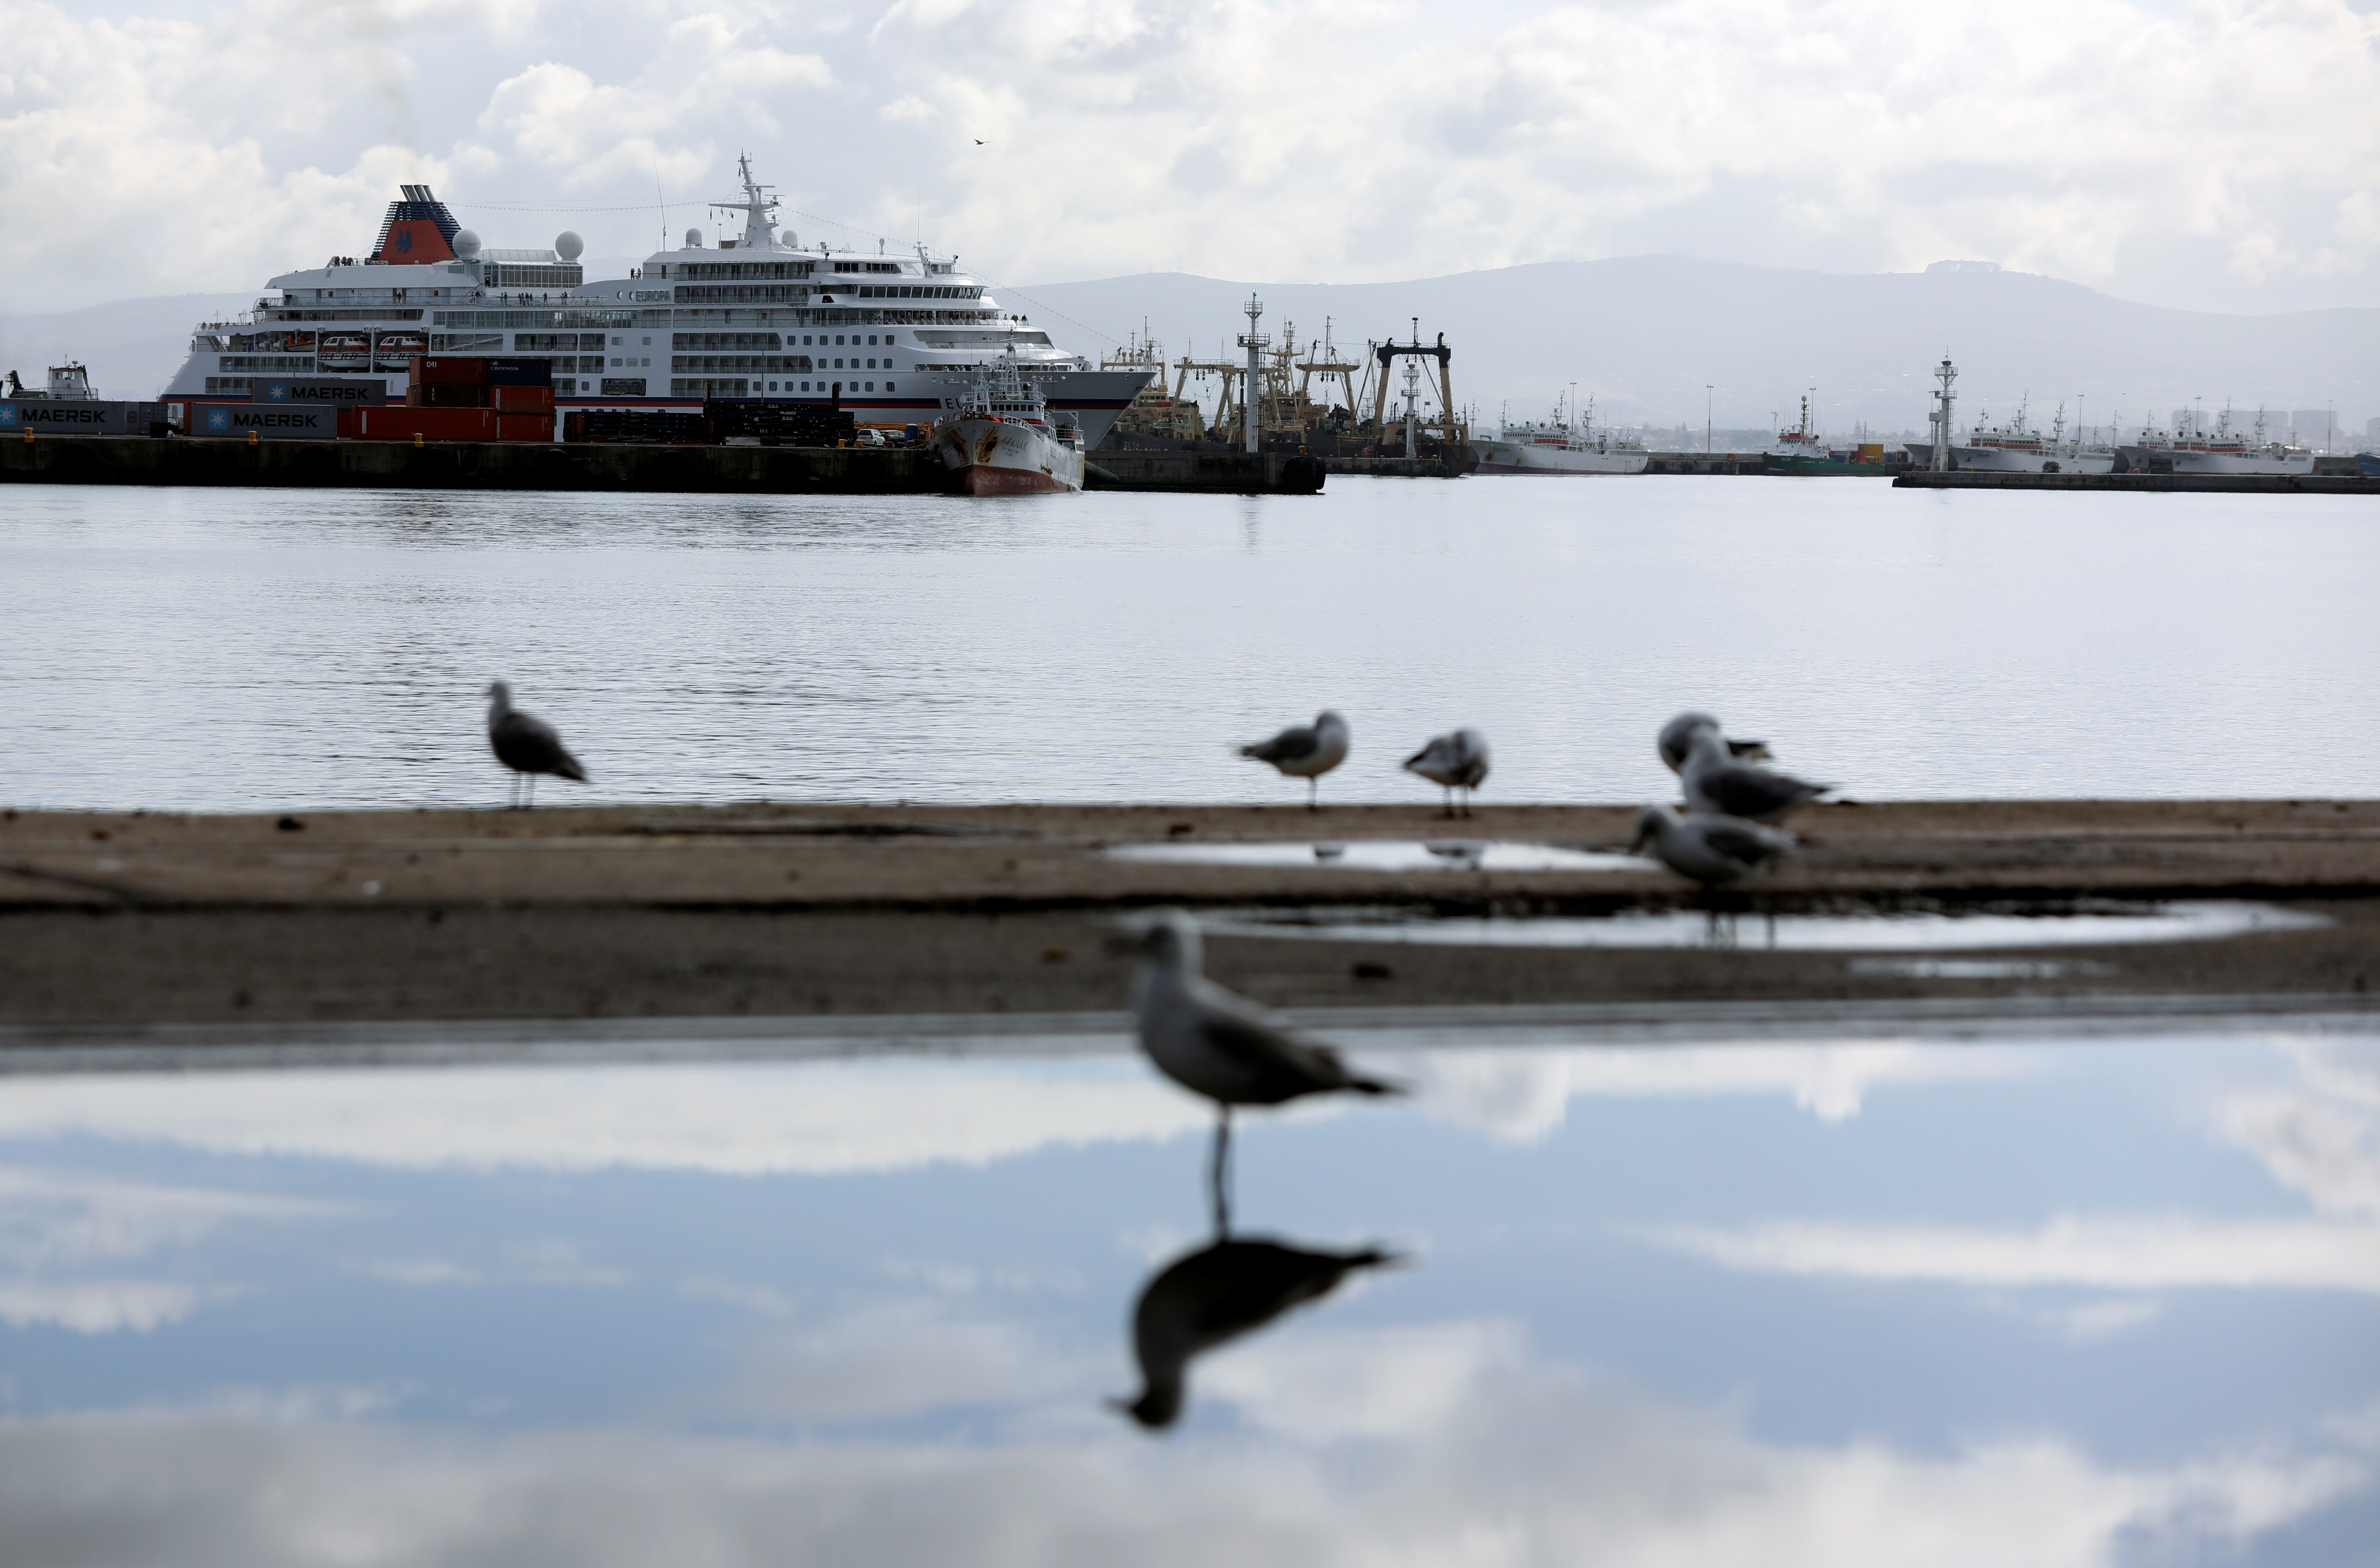 Gulls are seen as the Europa passenger liner arrives to South African waters, as the new coronavirus variant Omicron spreads, in Cape Town, South Africa, November 30, 2021. REUTERS/Shelley Christians